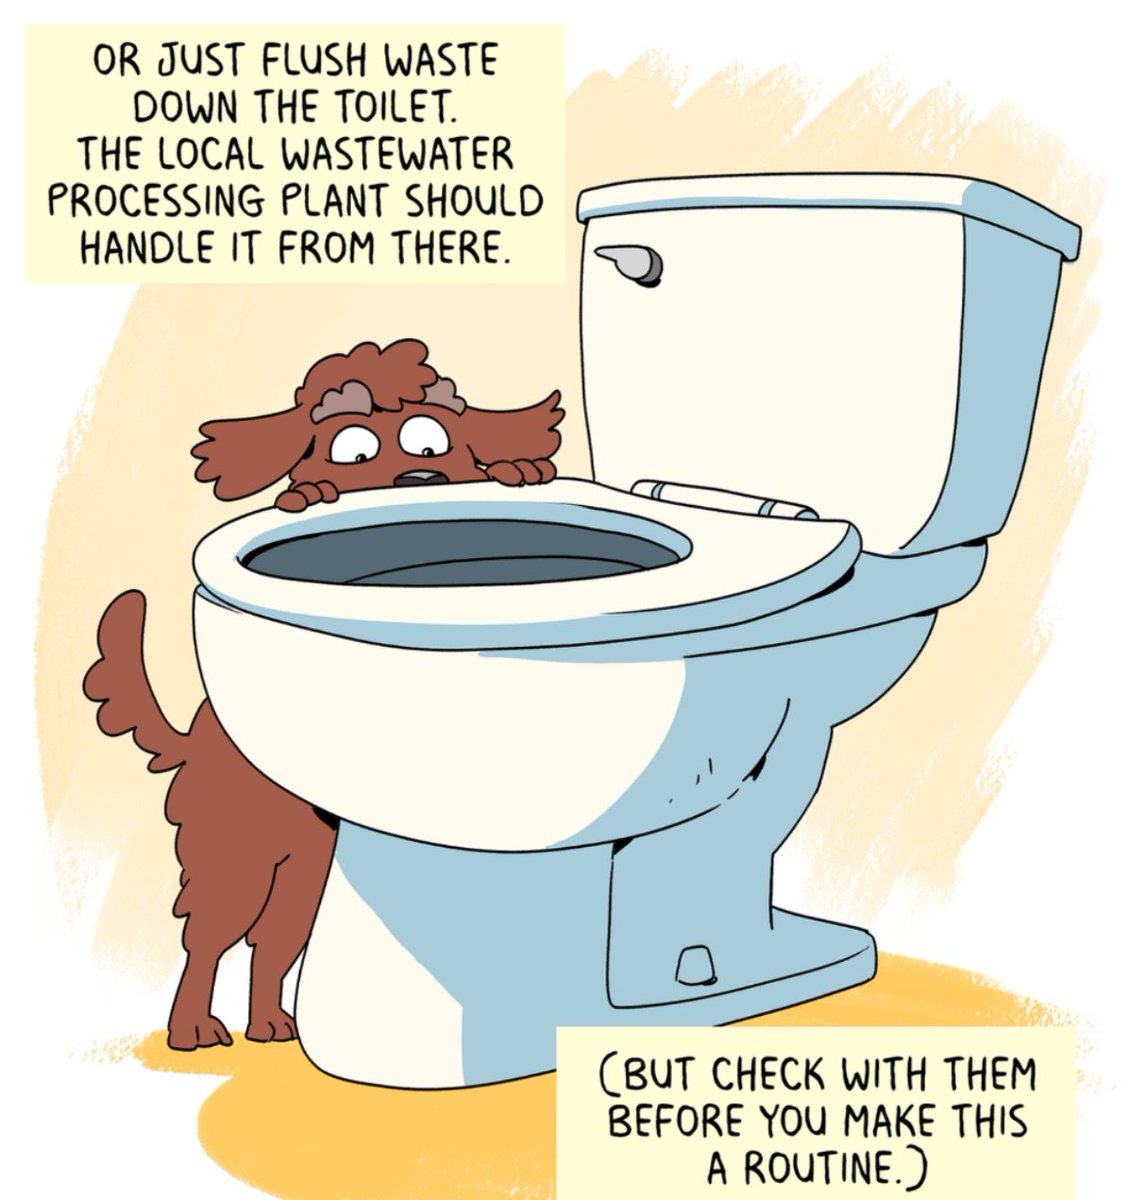 For being an article about not screwing up the environment they didn't do much research...You shouldn't flush your pet poop unless you don't have any other options. Human sewage treatment plants are designed for HUMAN waste. Flushing pet waste puts wildlife at risk.